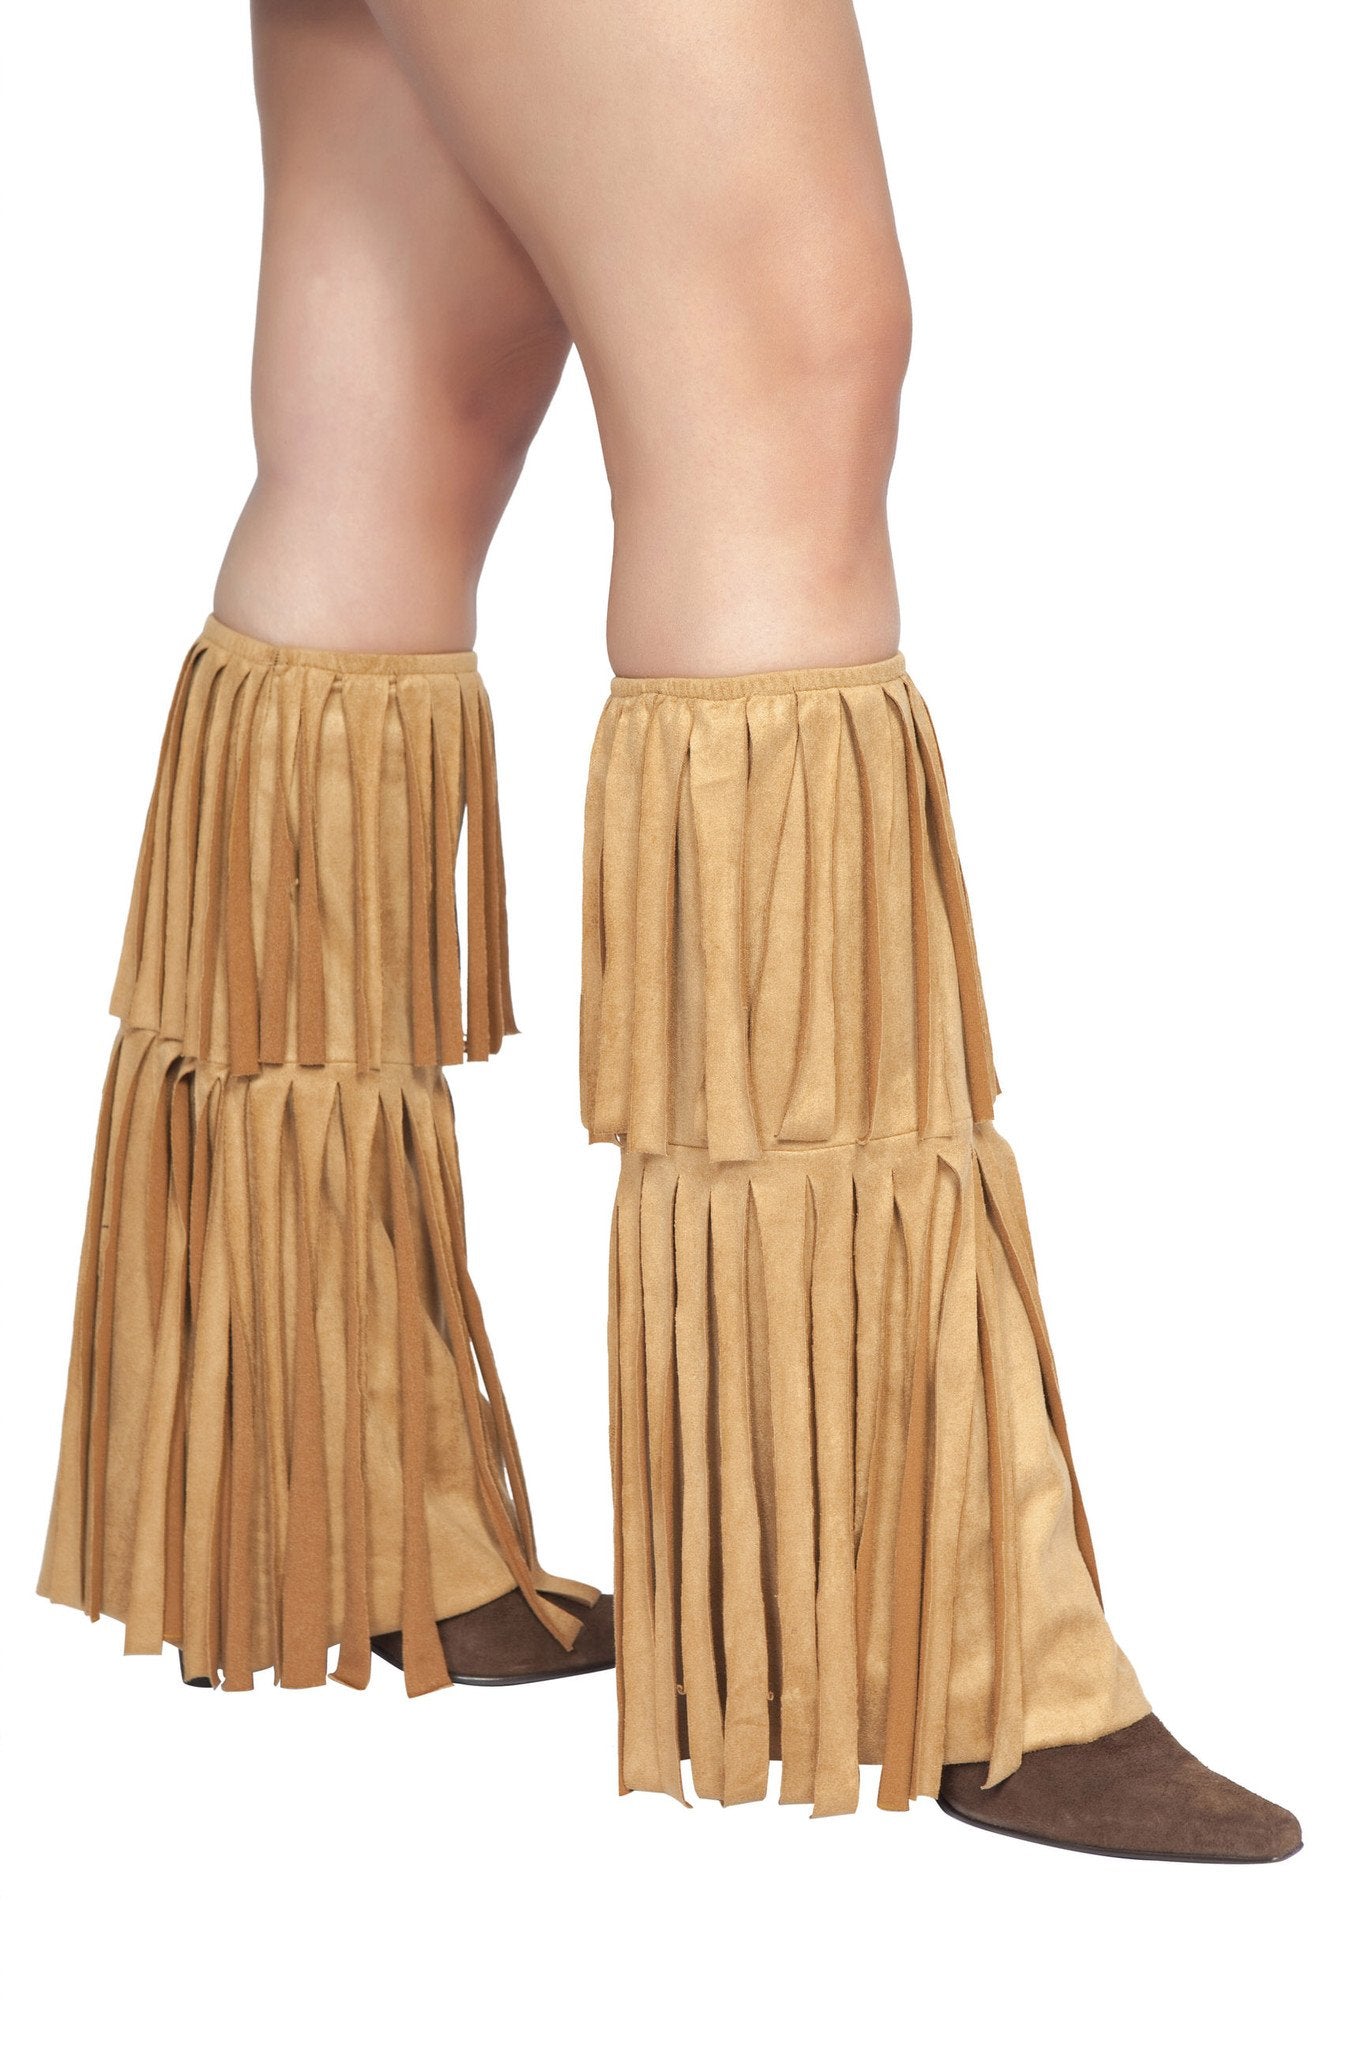 Pair of Suede Fringed Leg Warmers